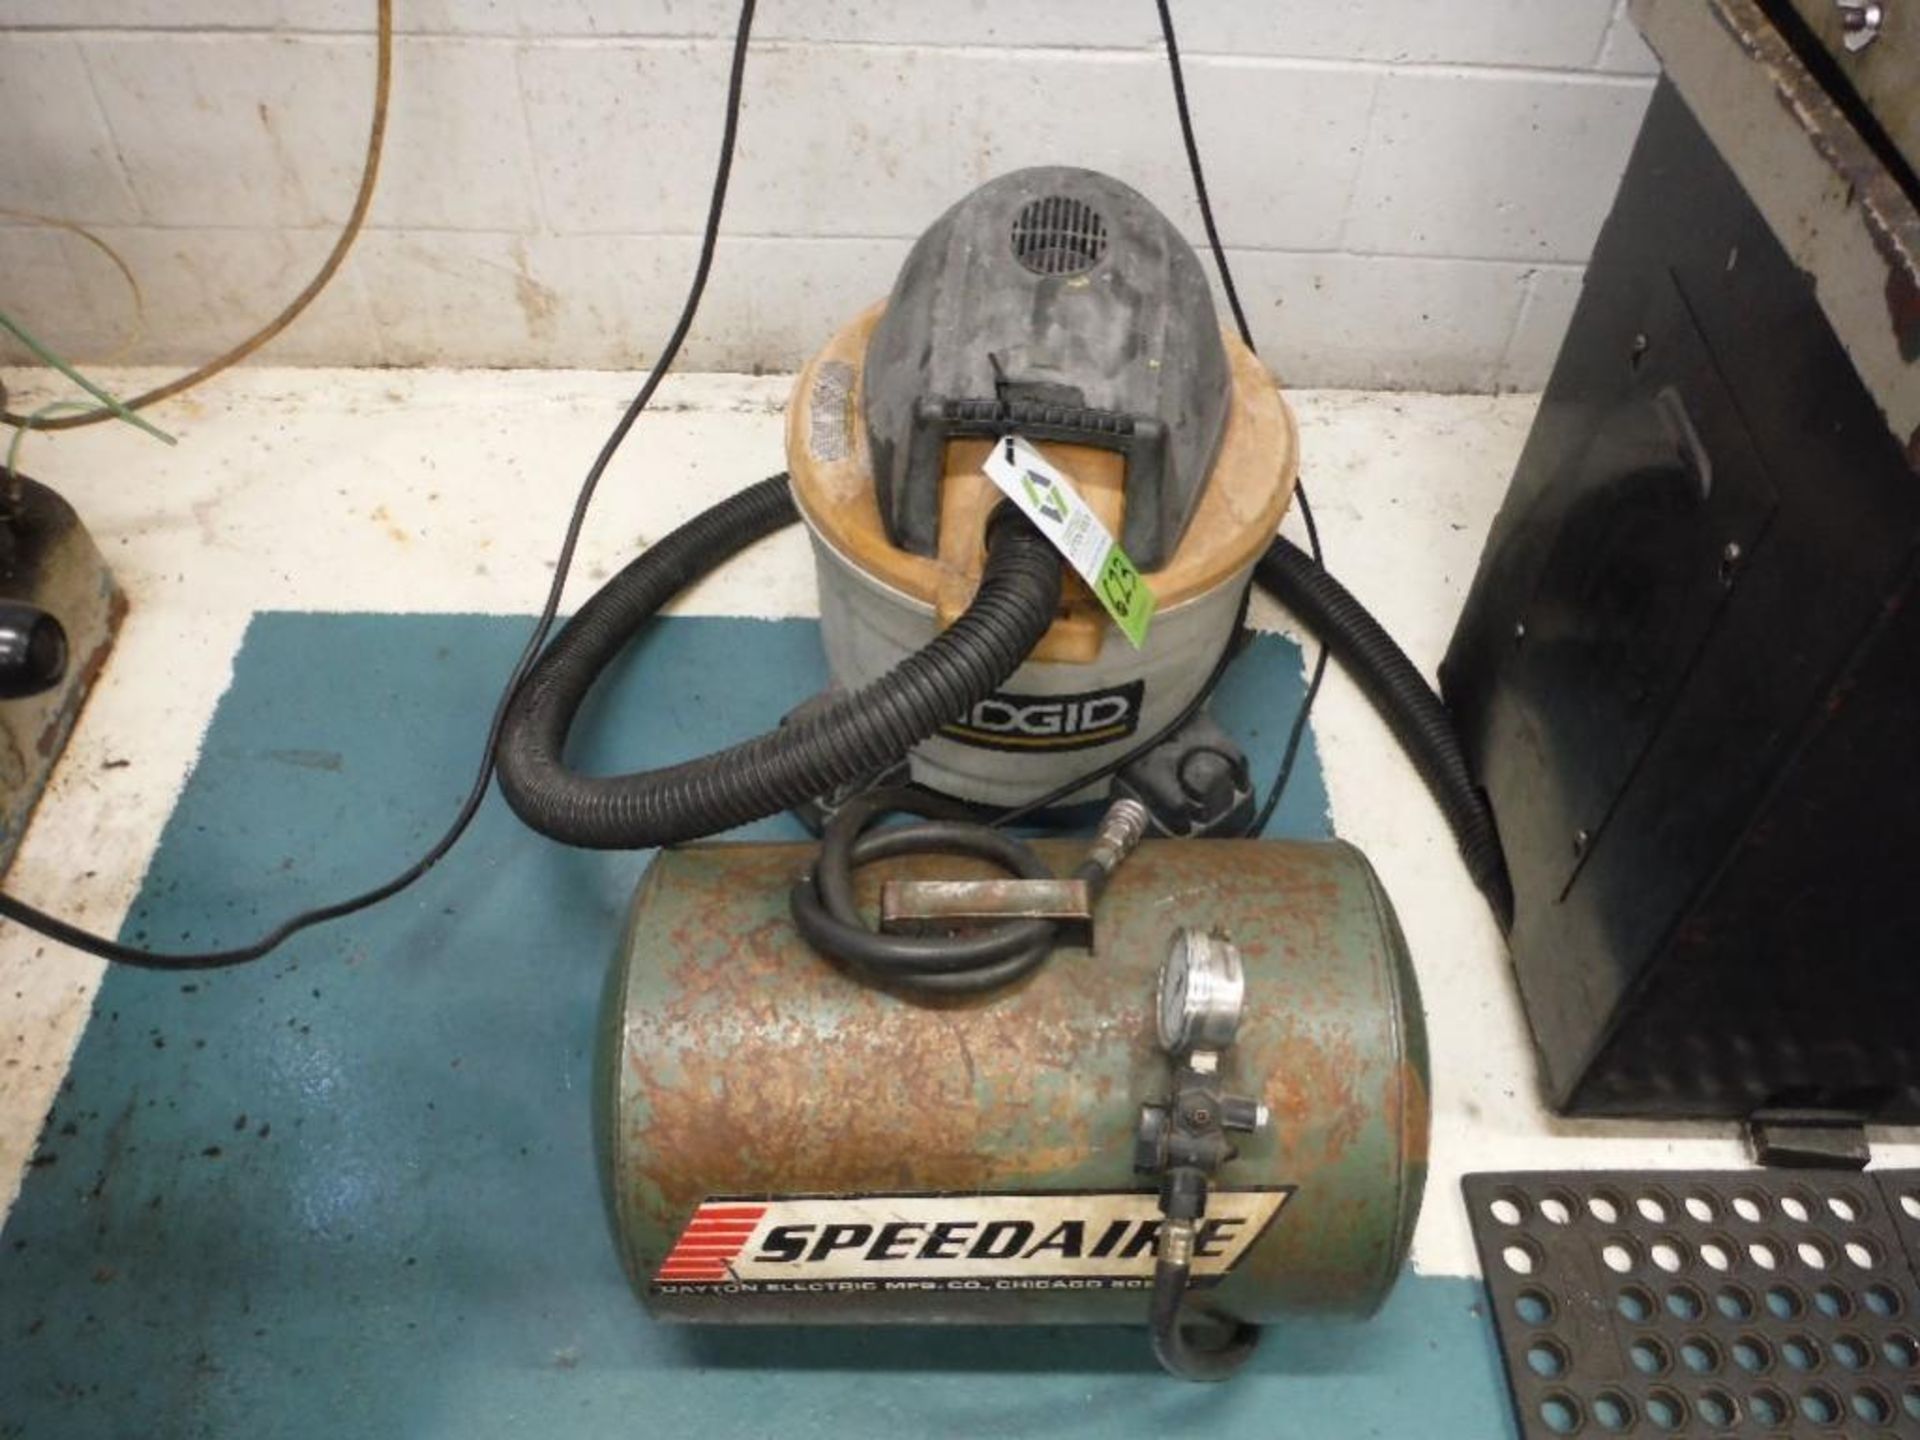 Rigid shop vac and speedaire portable air tank (lot). - RIGGING FEE FOR DOMESTIC TRANSPORT $25